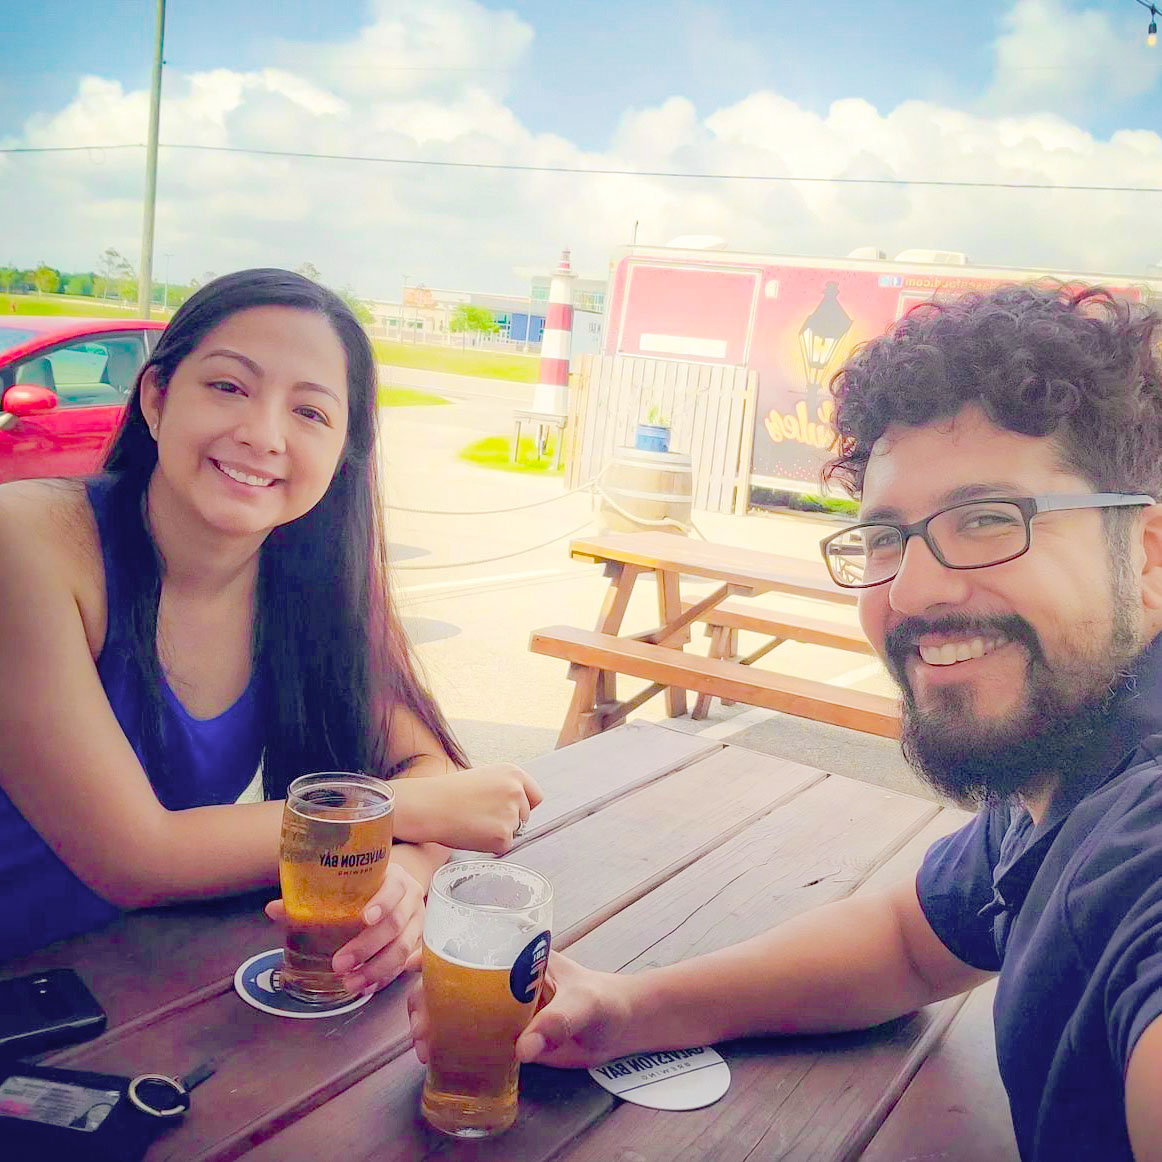 Fun times and great memories begin at your favorite local brewery🍻 📸 @laceemupmentality #galvestonbay #texascraftbeer